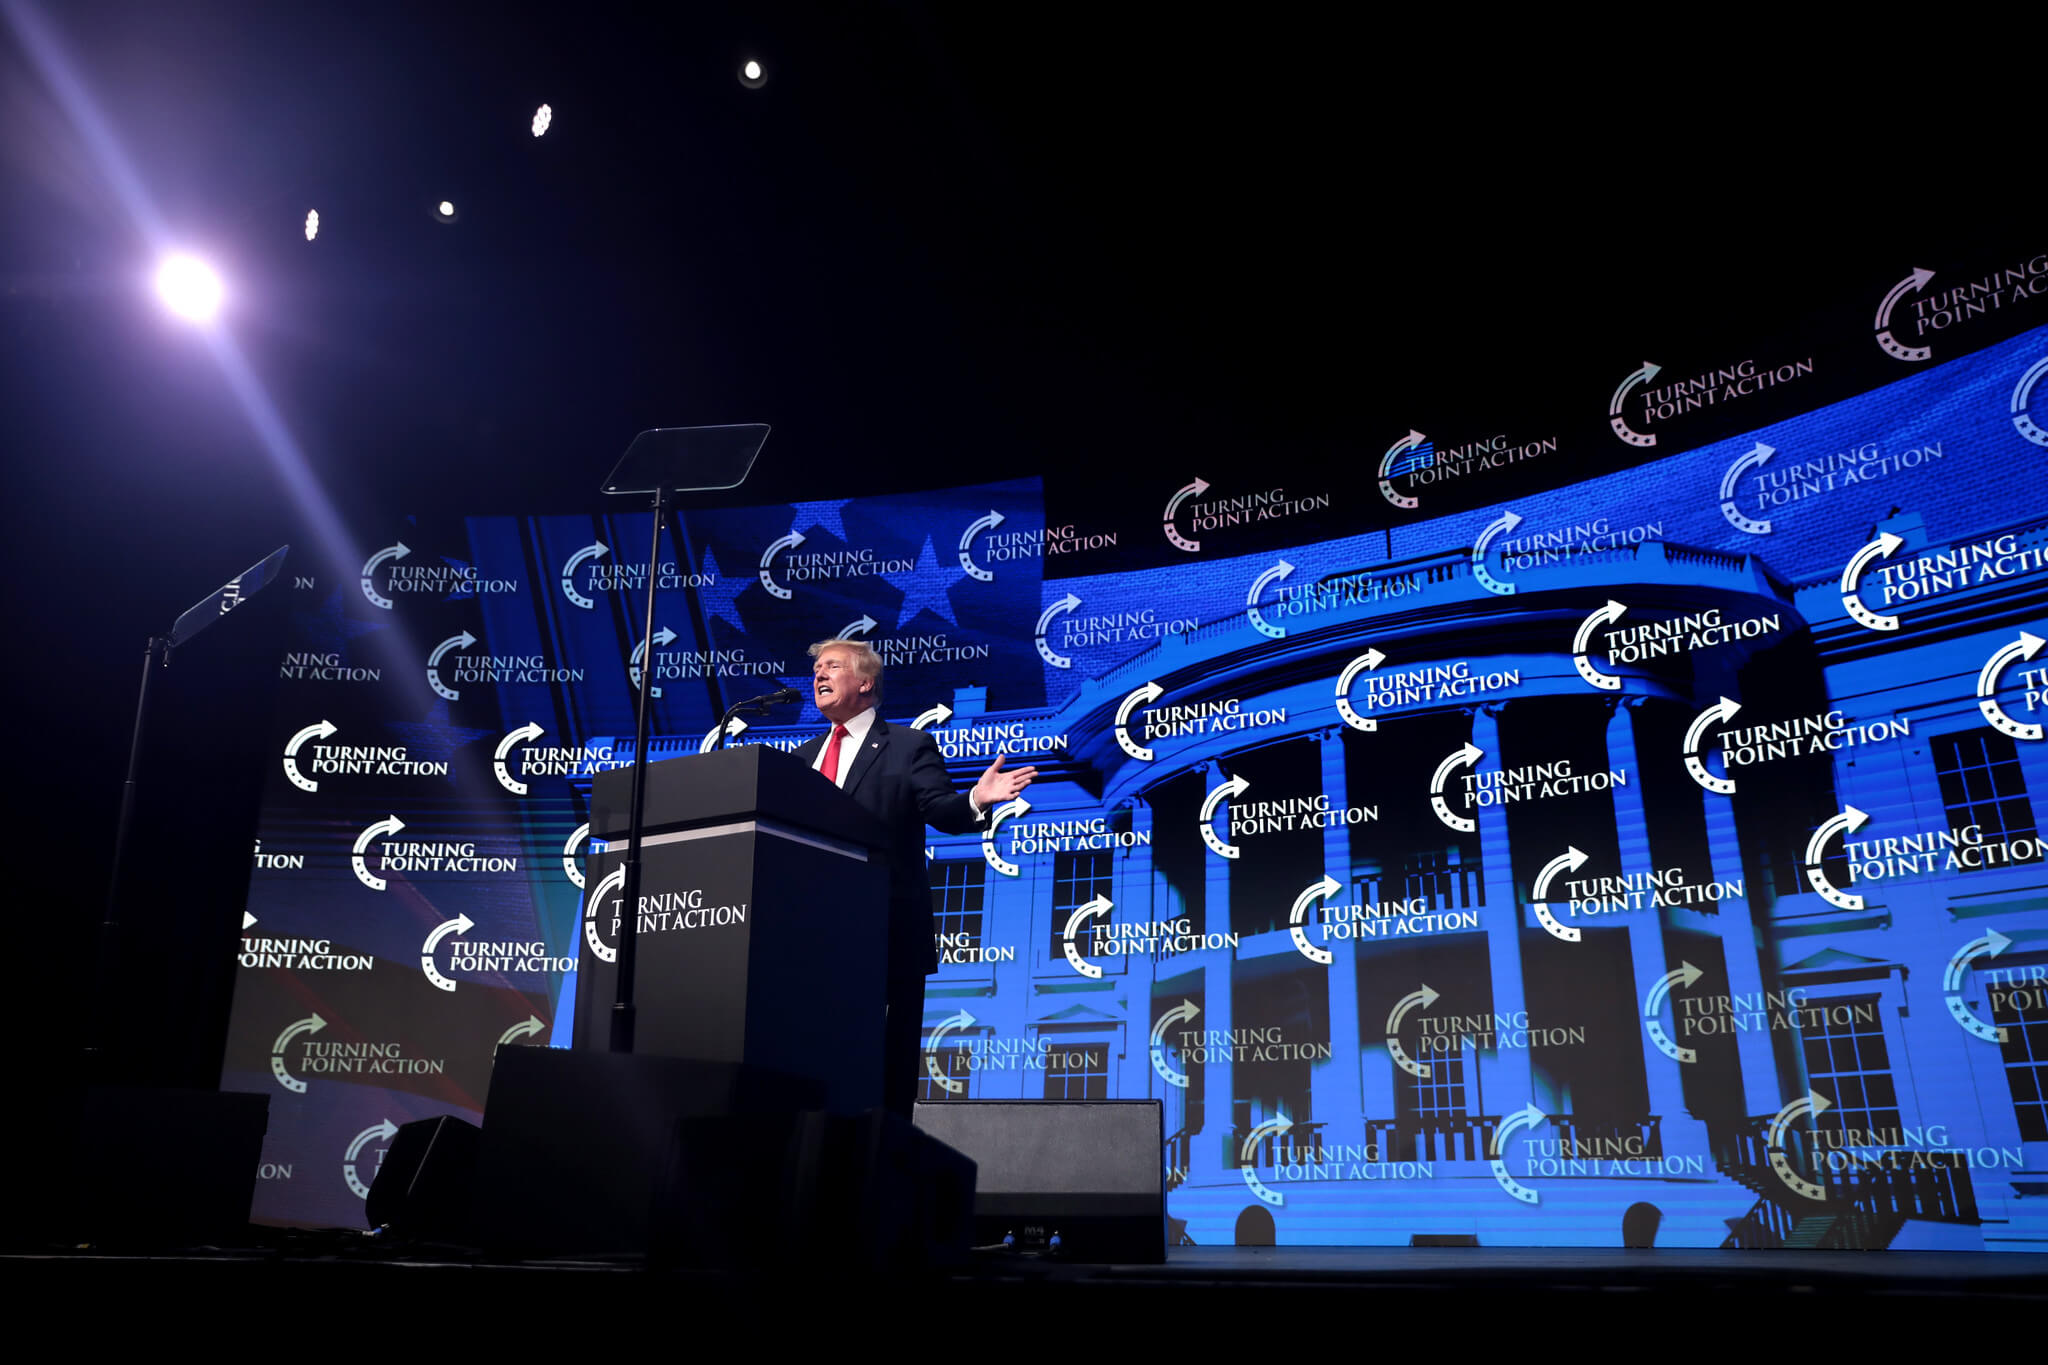 Former President of the United States Donald Trump speaking with attendees at the Rally to Protect Our Elections hosted by Turning Point Action in Phoenix, Arizona in July 2021. Gage Skidmore - The Star News Network 